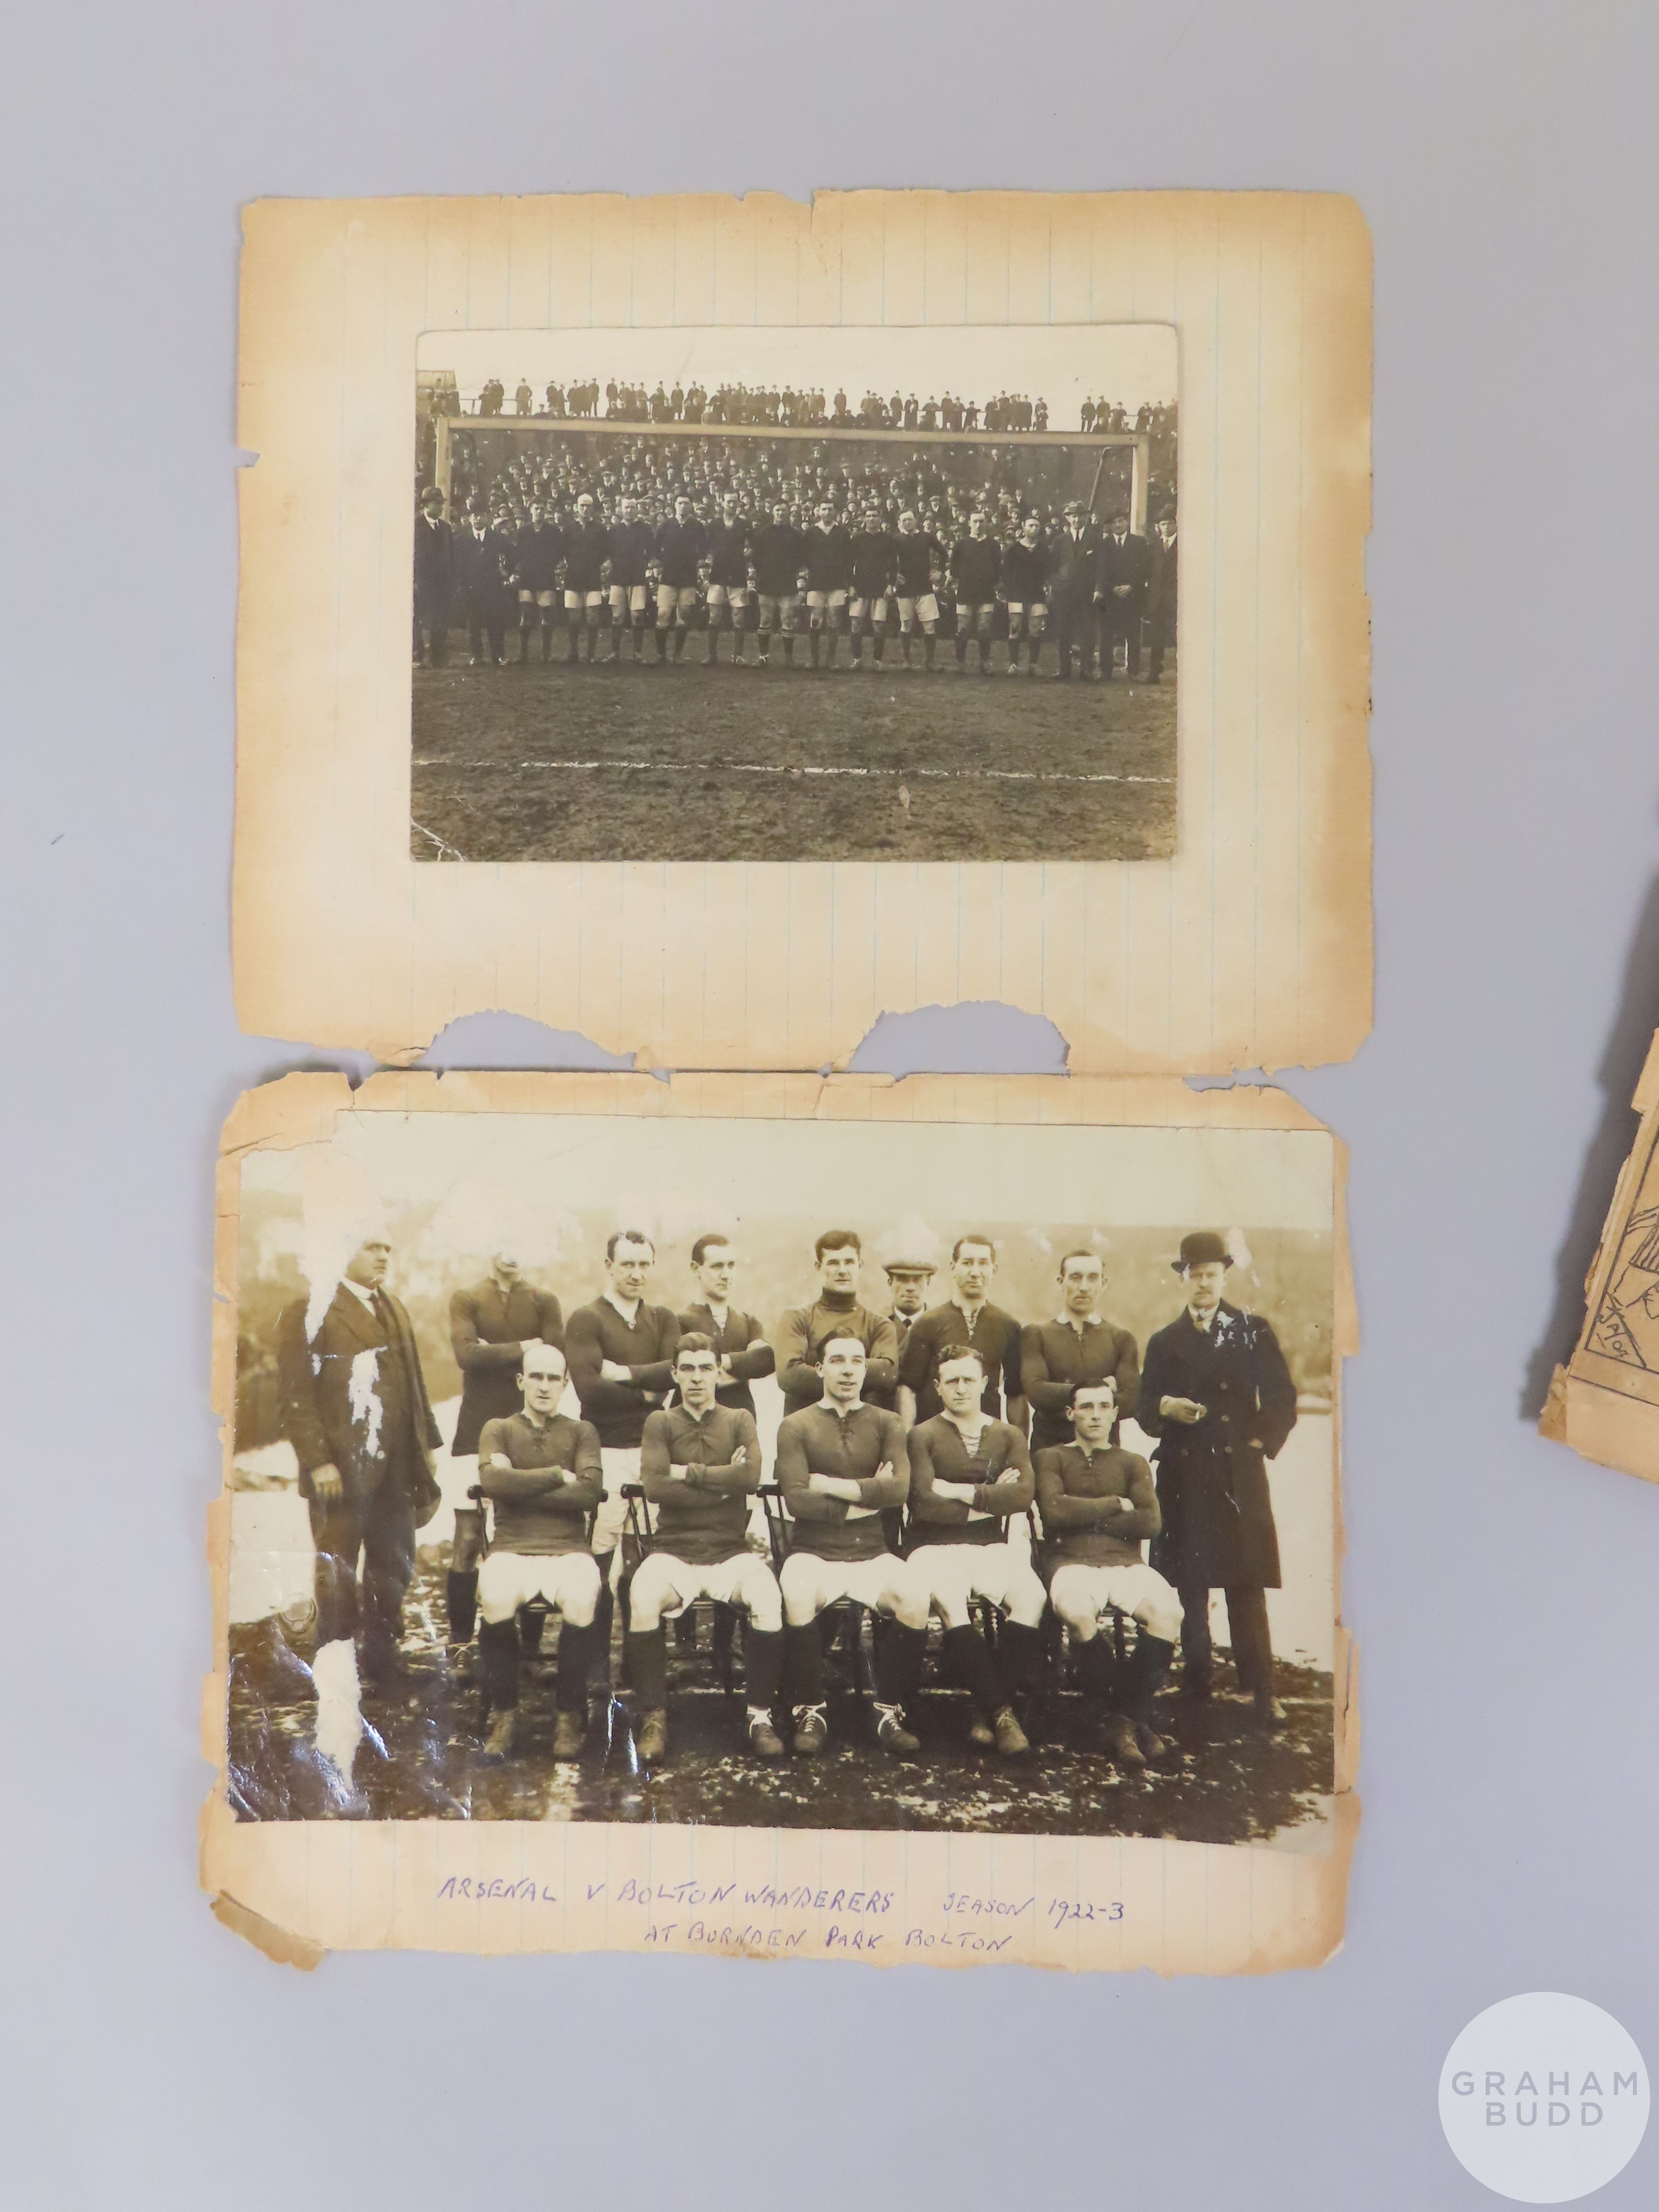 Two rare black and white Arsenal team press photographs, c.1919-20 - Image 2 of 2